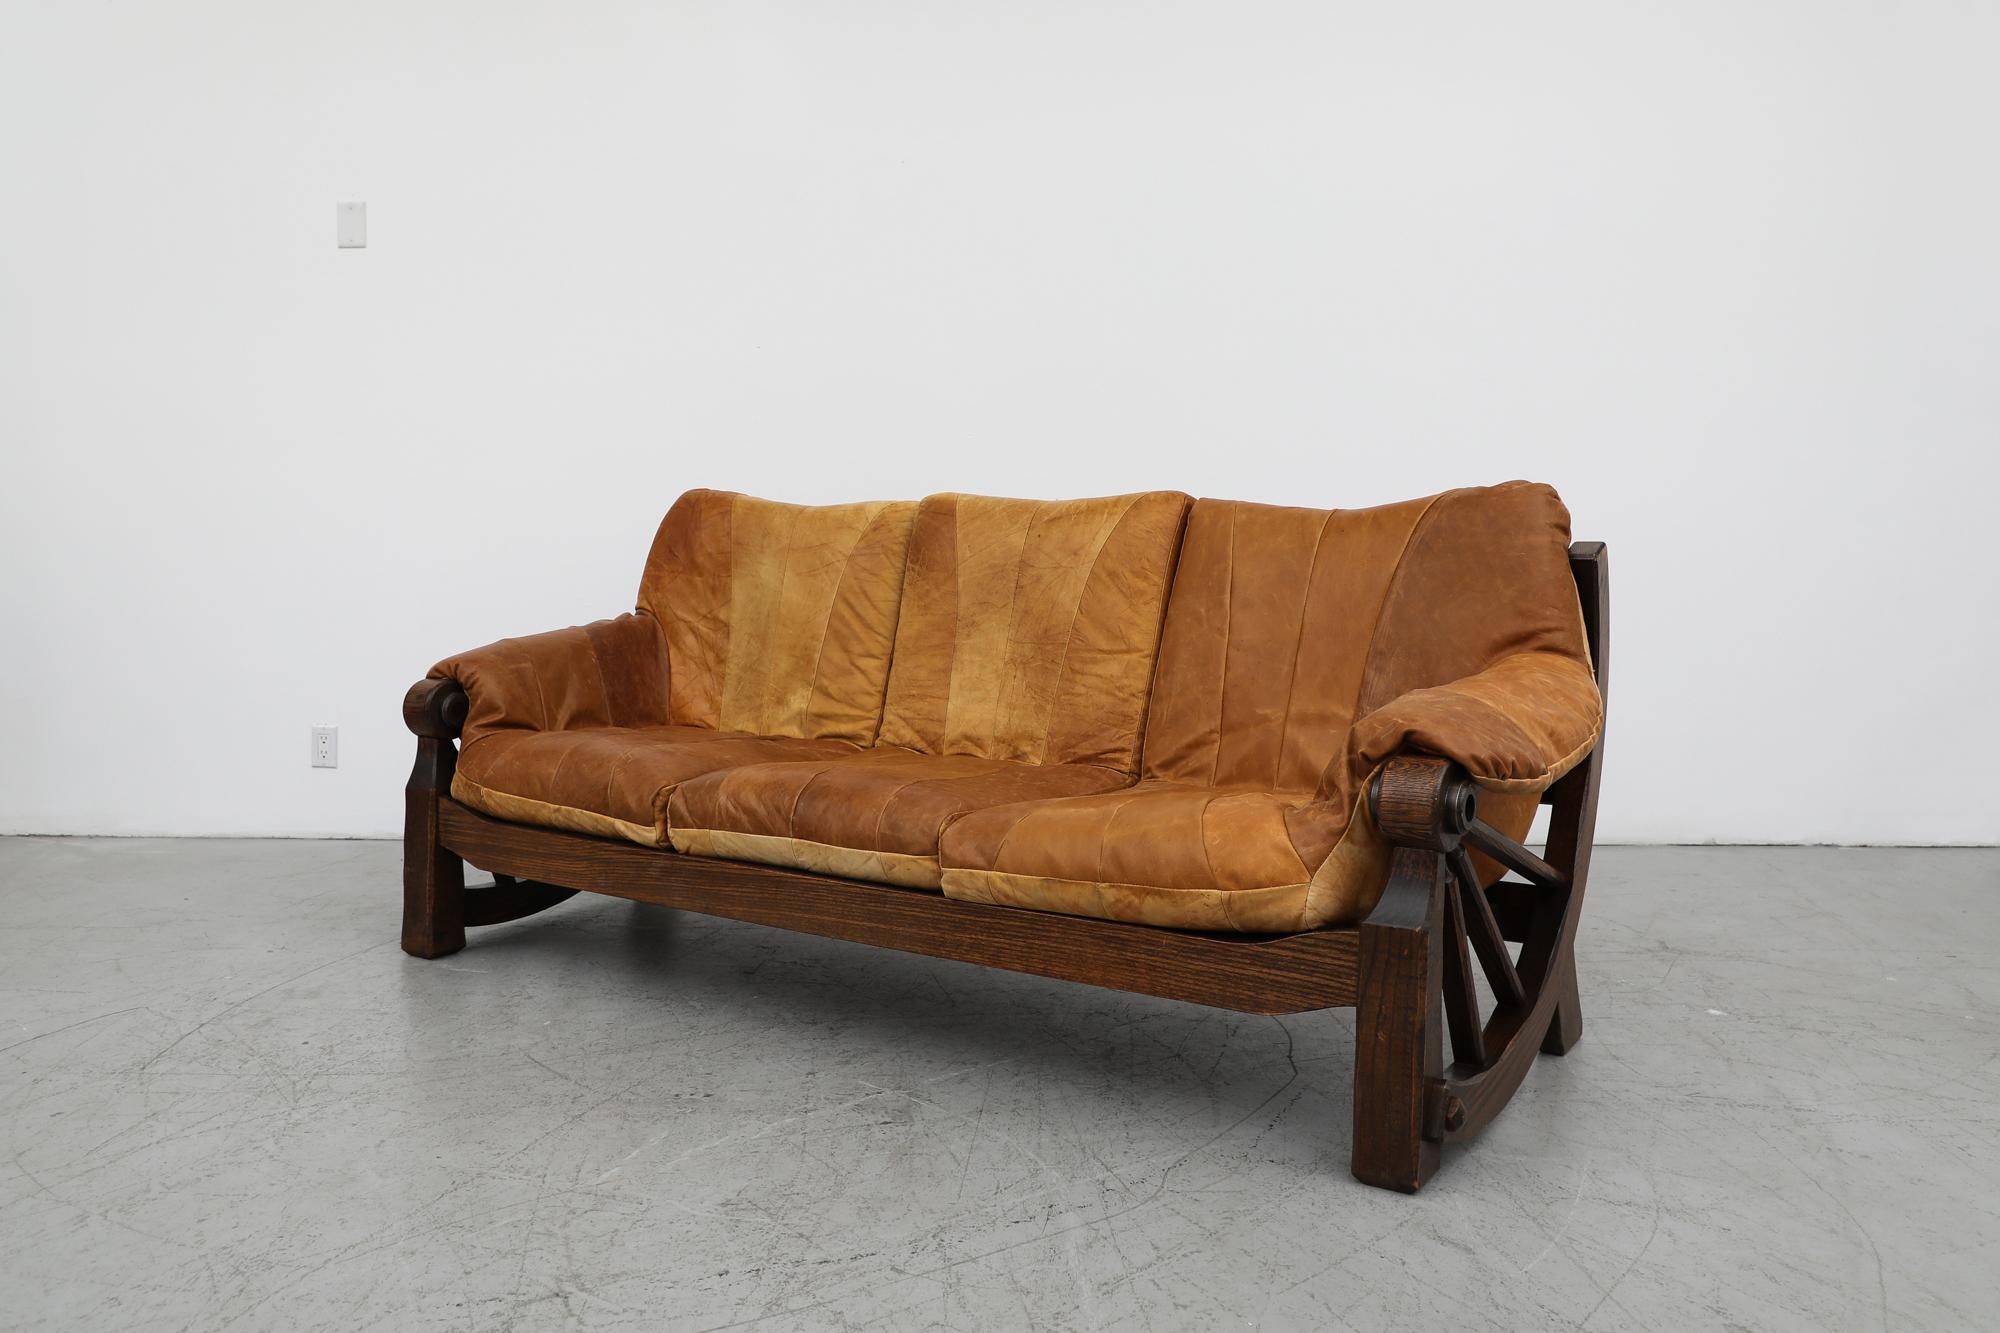 Mid-Century Brutalist leather patchwork sofa with western style carved oak frame inspired by the wagon wheel. Lightly refinished frame, in otherwise original condition with visible remaining wear and patina that is consistent with its age and use.